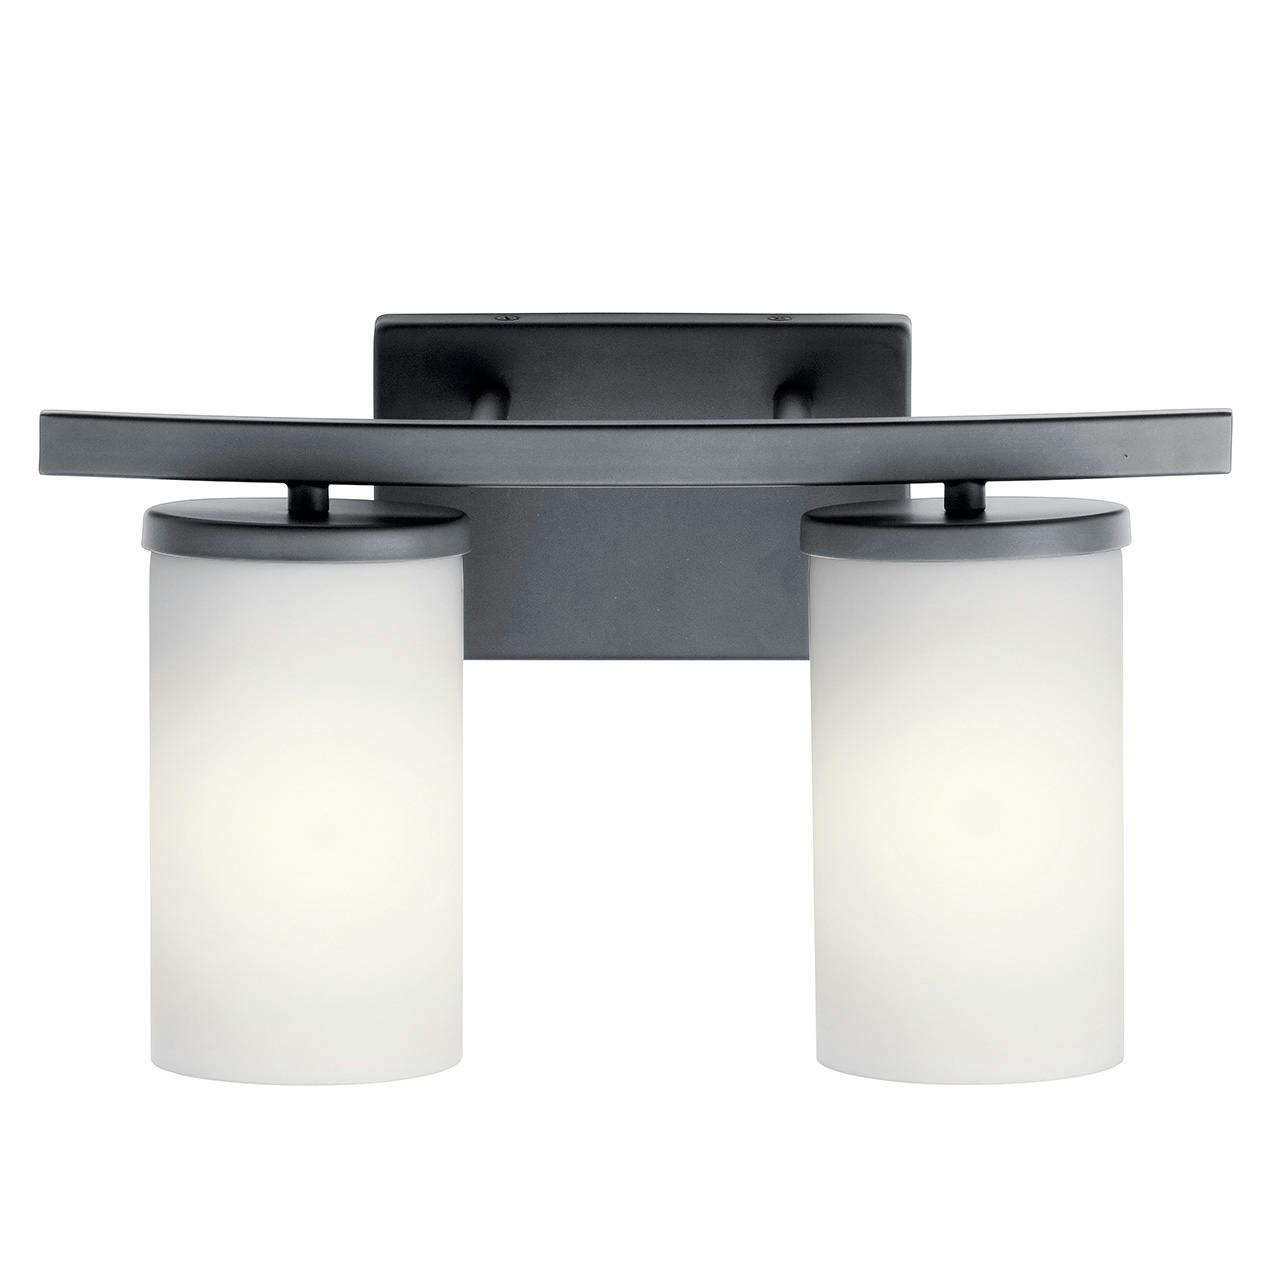 The Crosby 2 Light Vanity Light Black facing down on a white background